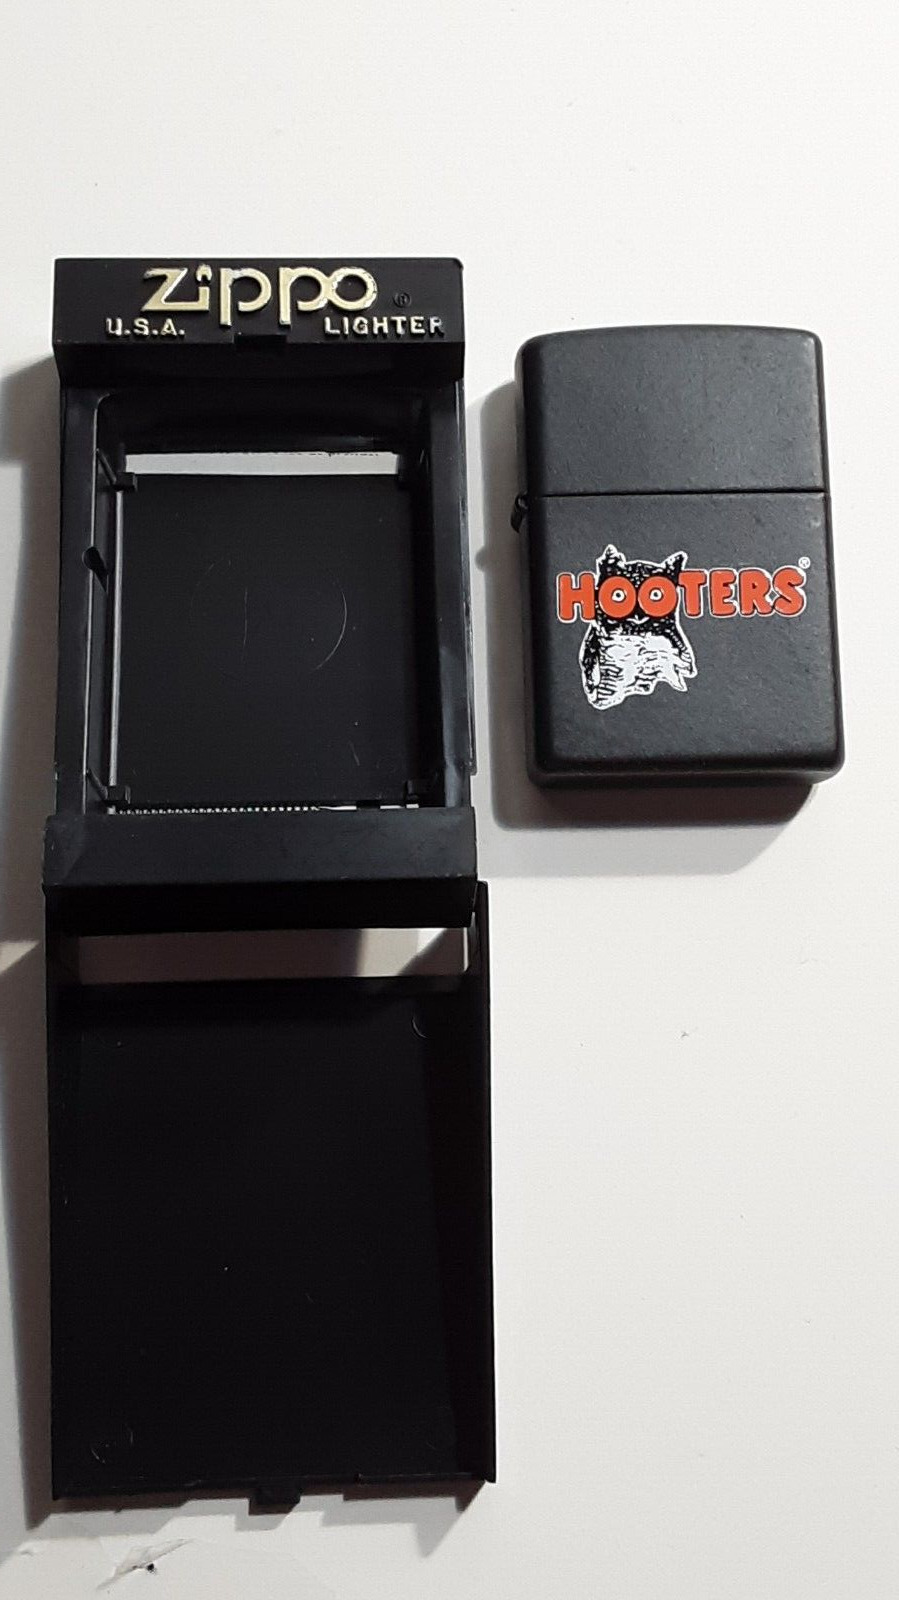 New Unfired Zippo Hooters Matte Black Lighter Rare in original box & papers